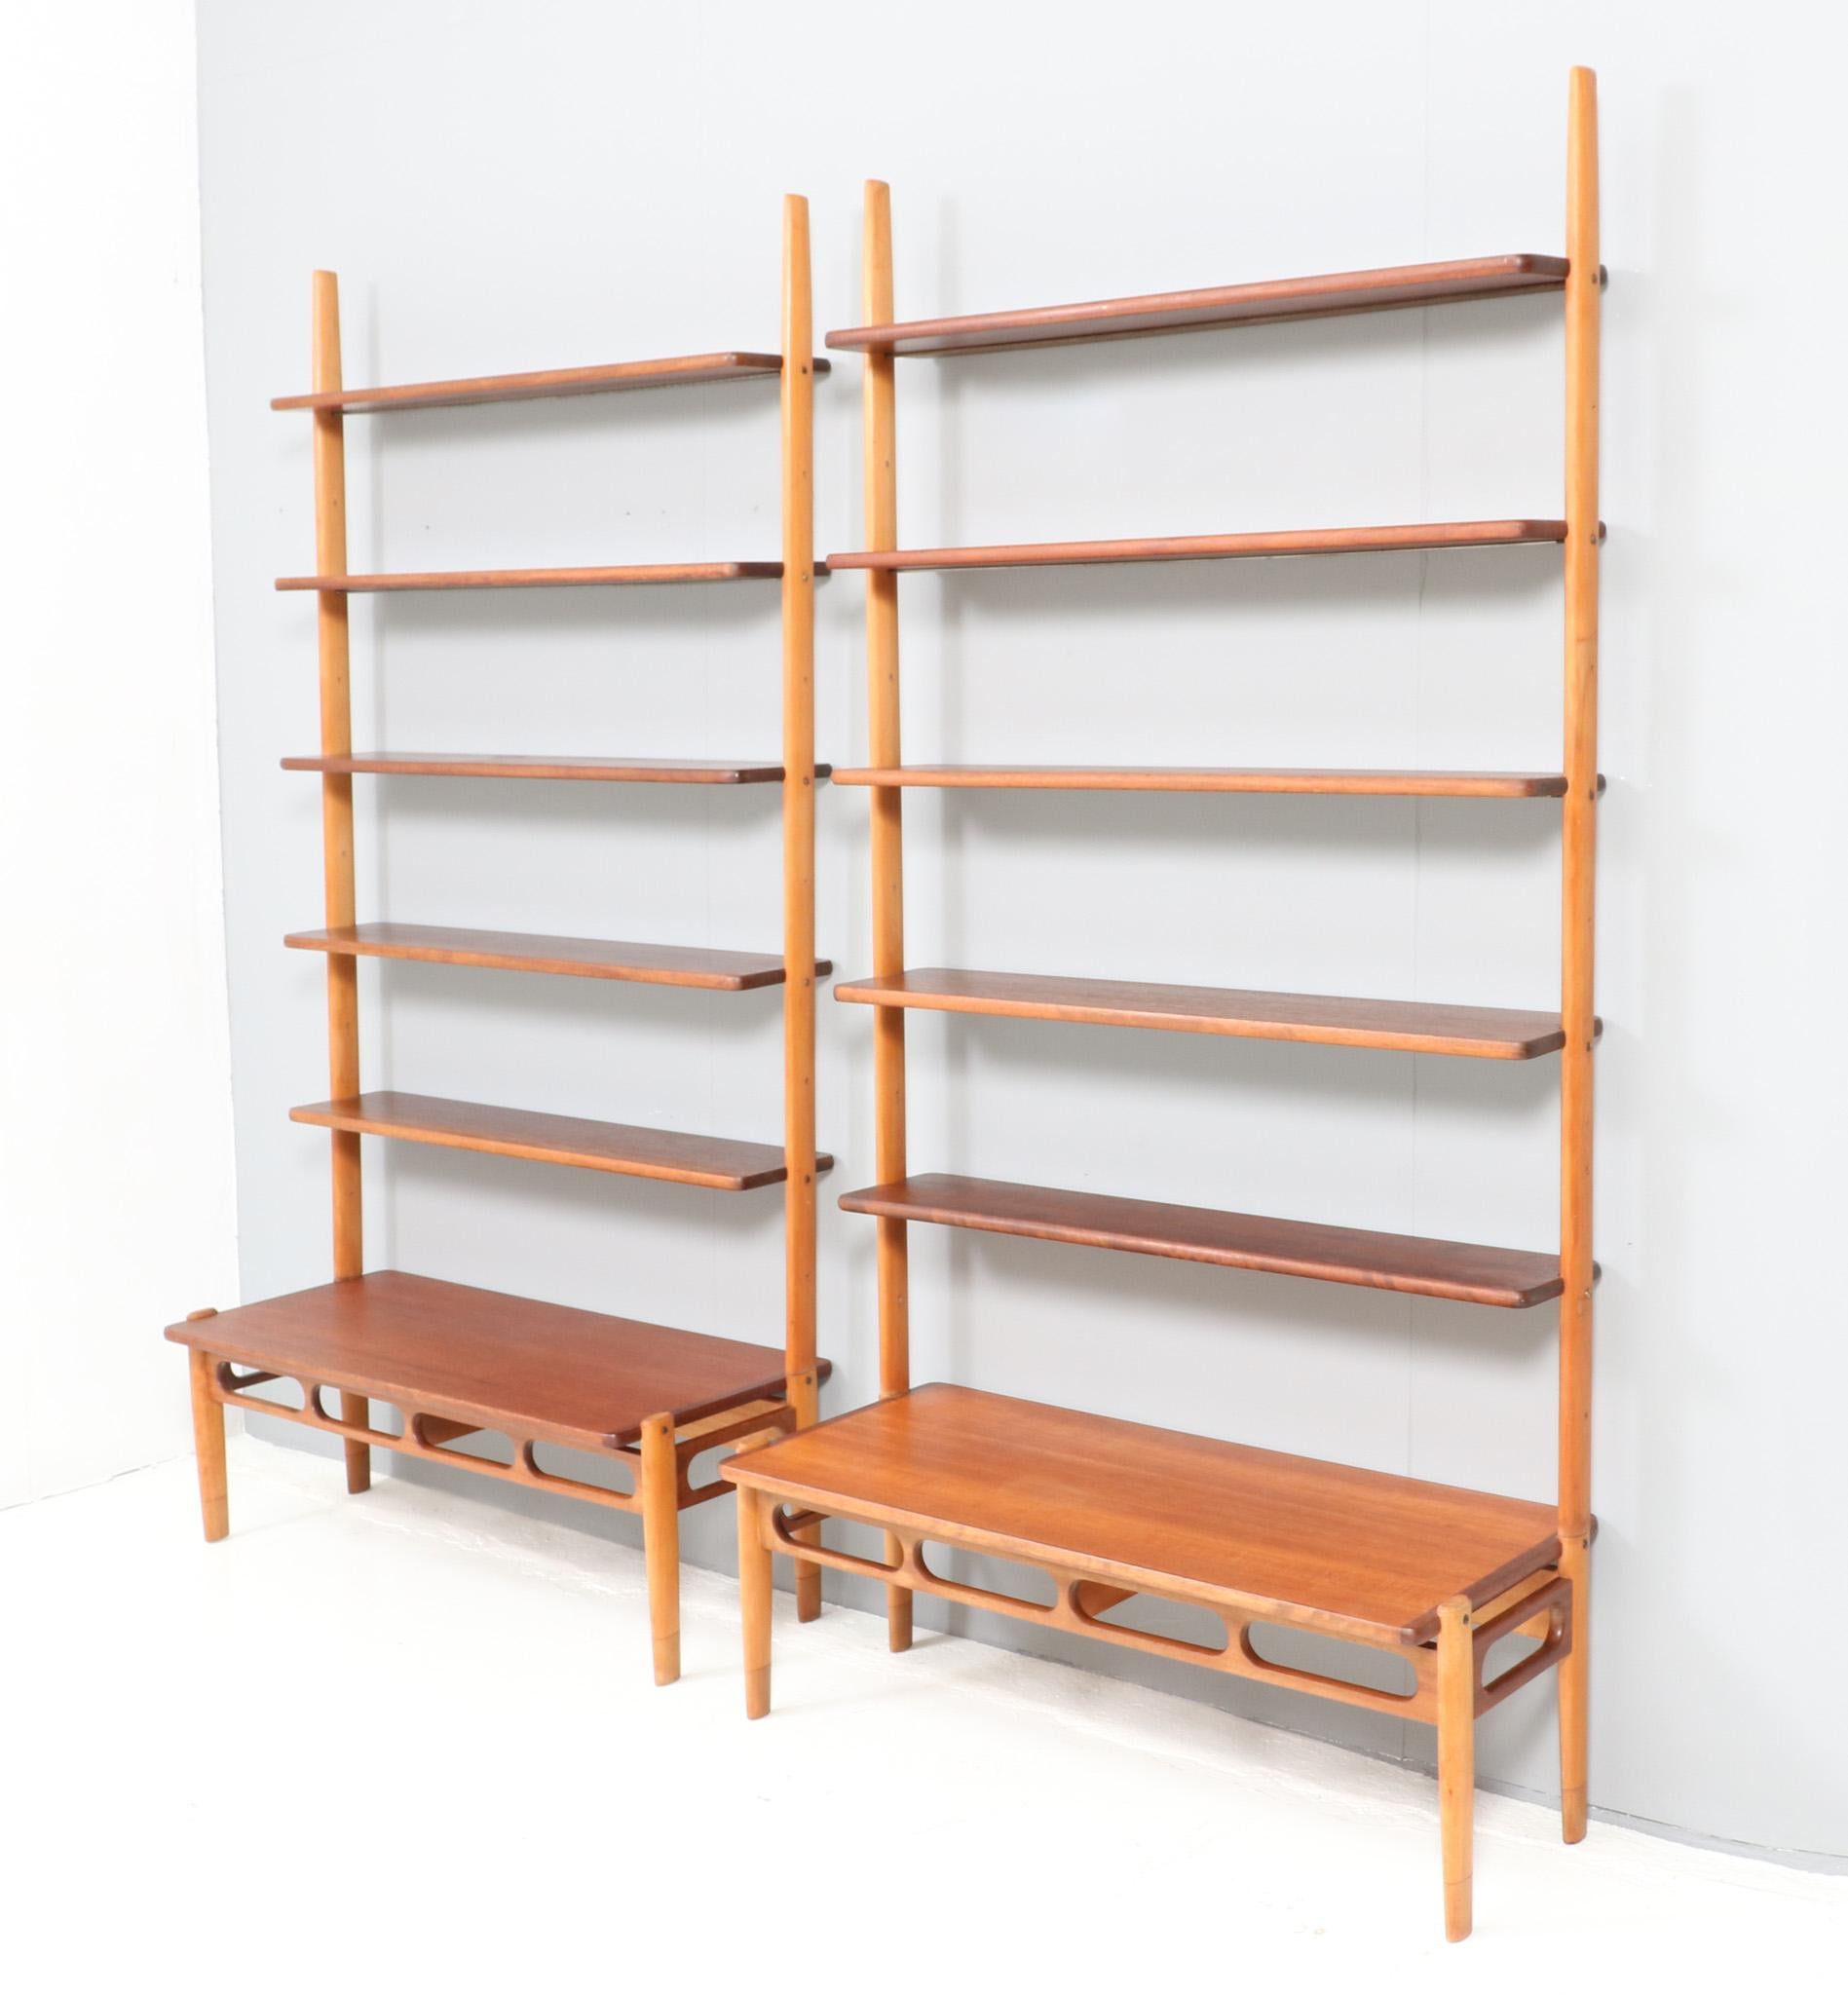 Pair of Mid-Century Modern modular two-tone wall units or shelving units. Design by William Watting for ScanFlex Holland. Striking Danish/Dutch design from the 1960s. Both wall units are made of solid patinated beech and original teak veneer and